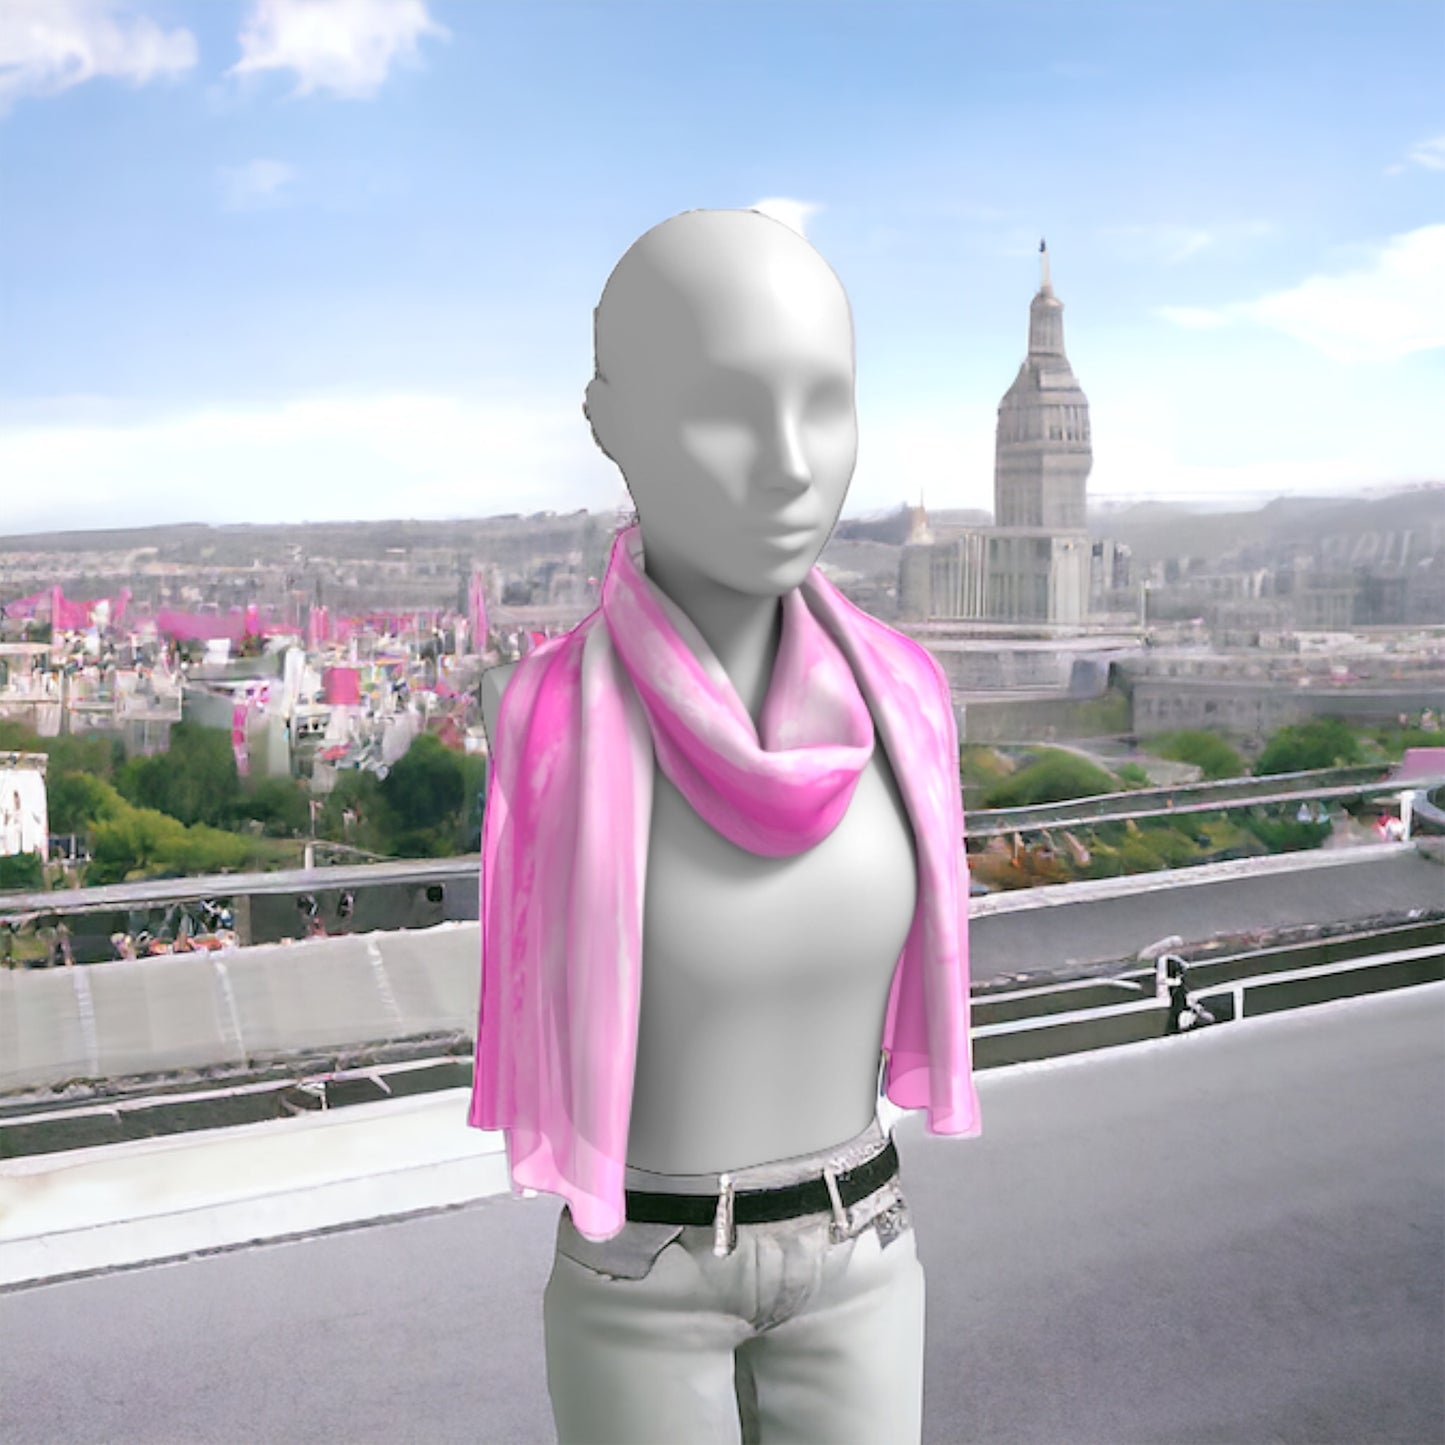 Parksville Beach long scarf is shown worn around the neck with a city background.